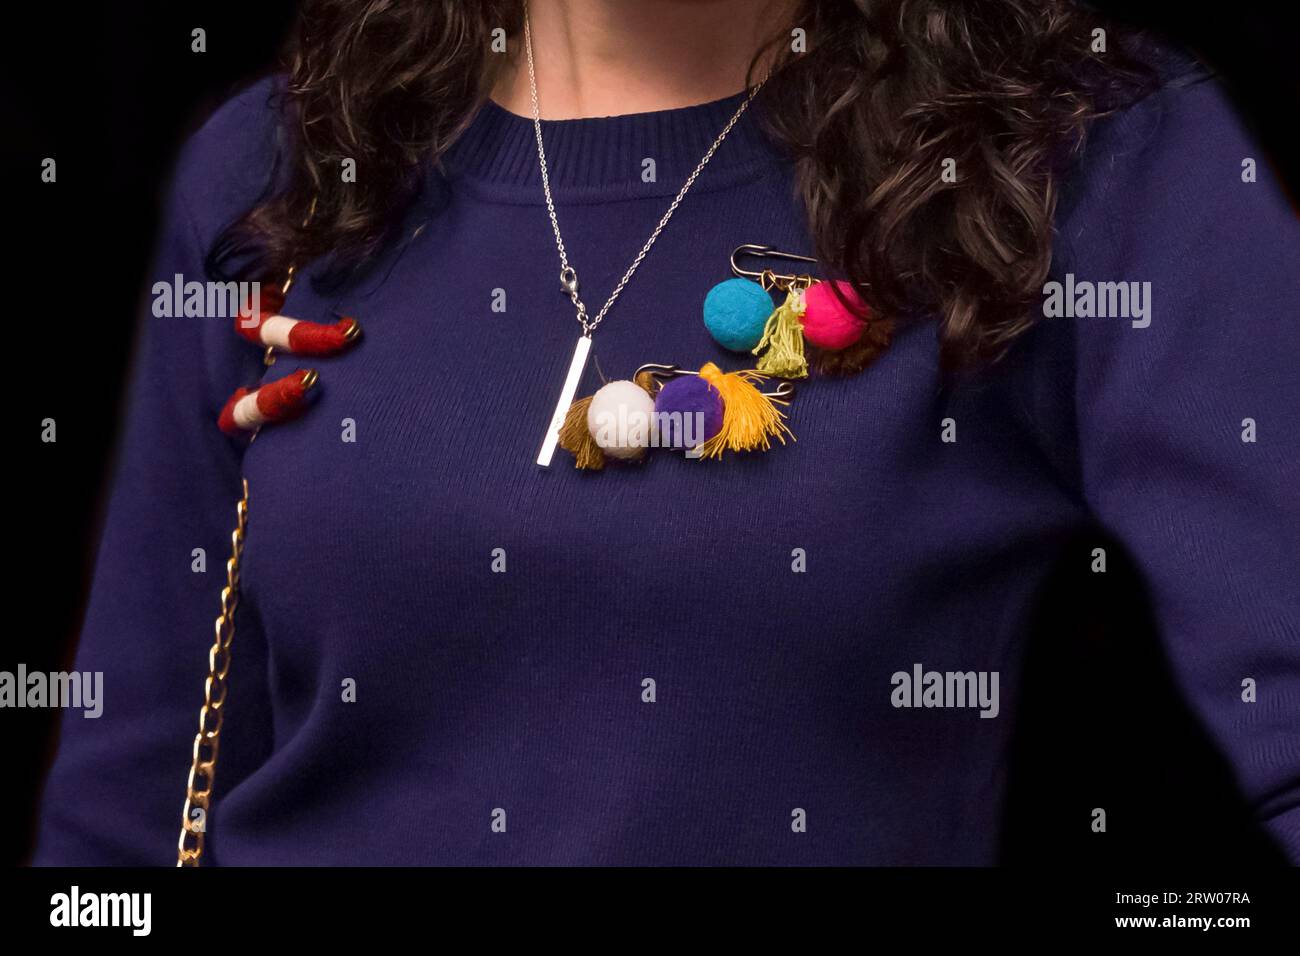 Women's dark purple sweater decorated with colored objects, soft toys on a pin, close-up on a black background. Stock Photo